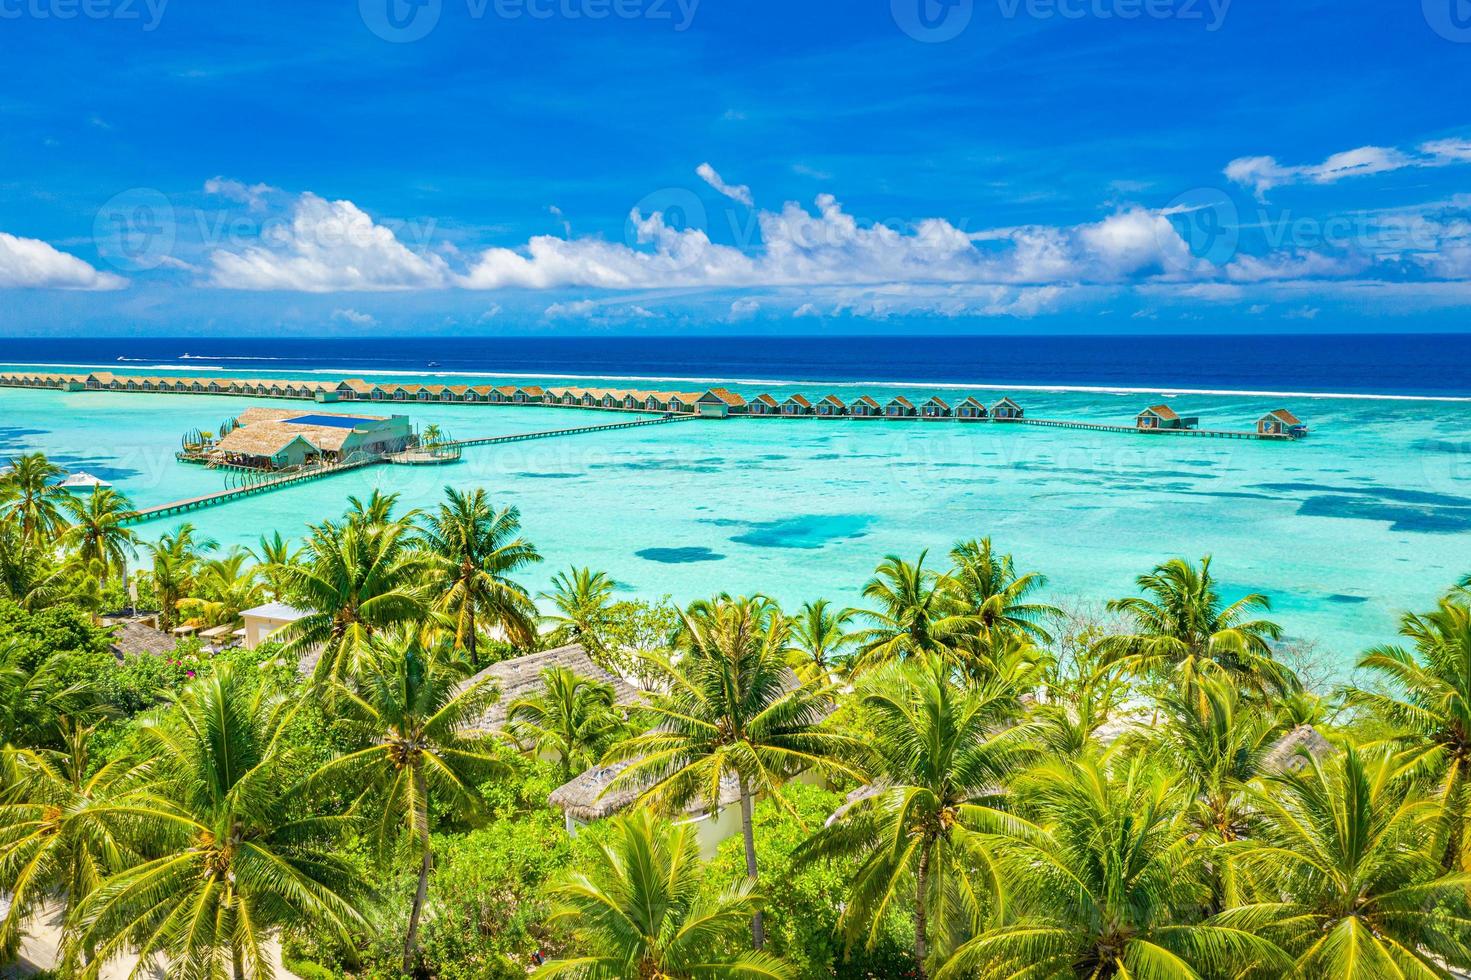 Amazing atoll and island in Maldives from aerial view. Tranquil tropical landscape and seascape with palm trees on white sandy beach, peaceful nature in luxury resort island. Summer holiday mood photo